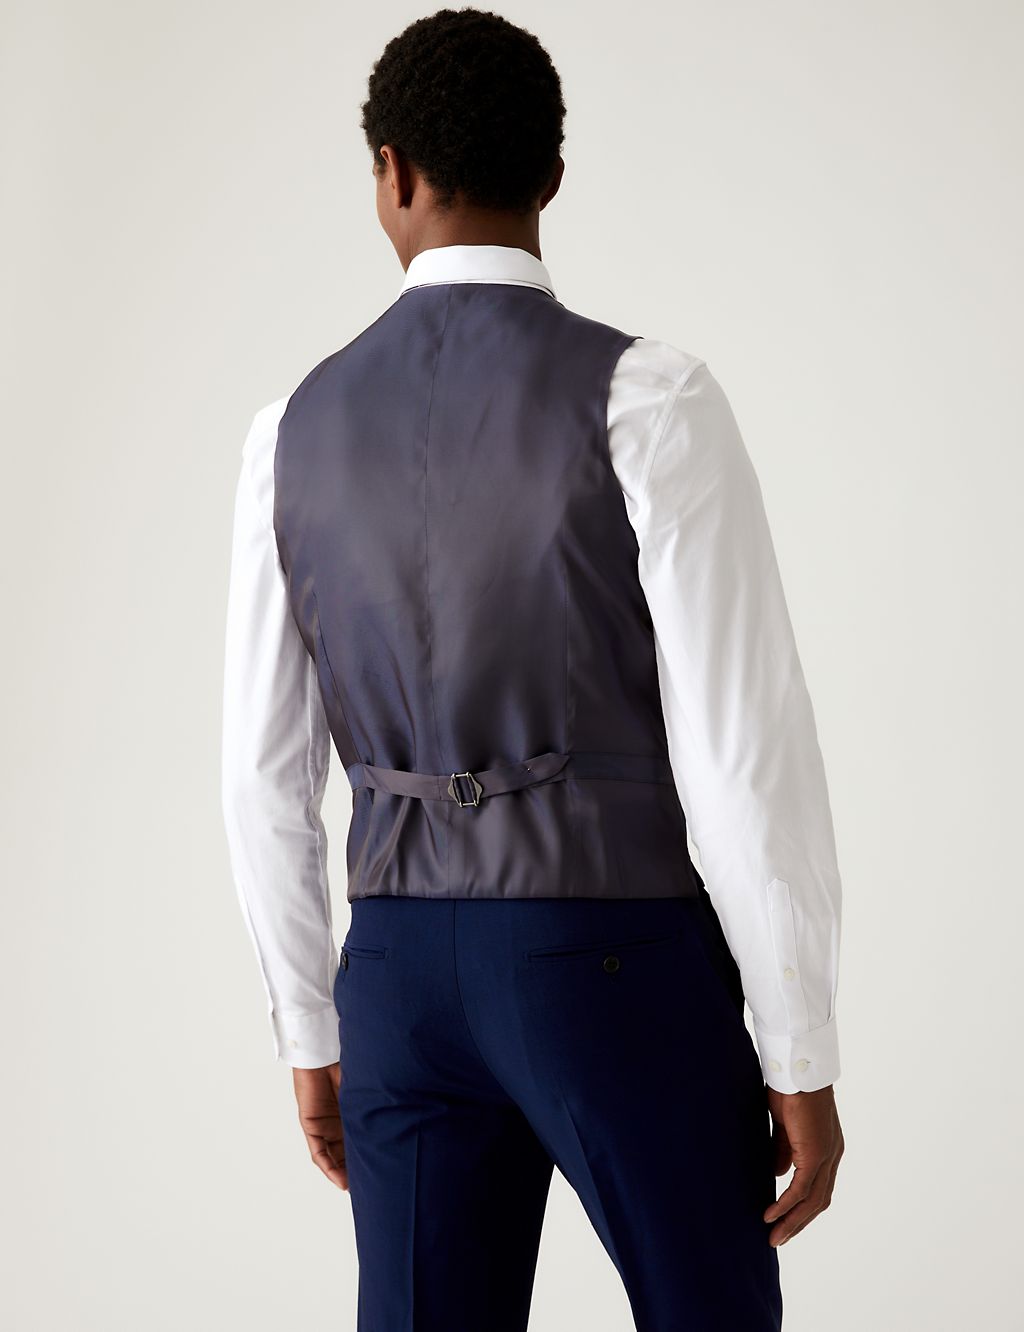 The Ultimate Waistcoat 8 of 9